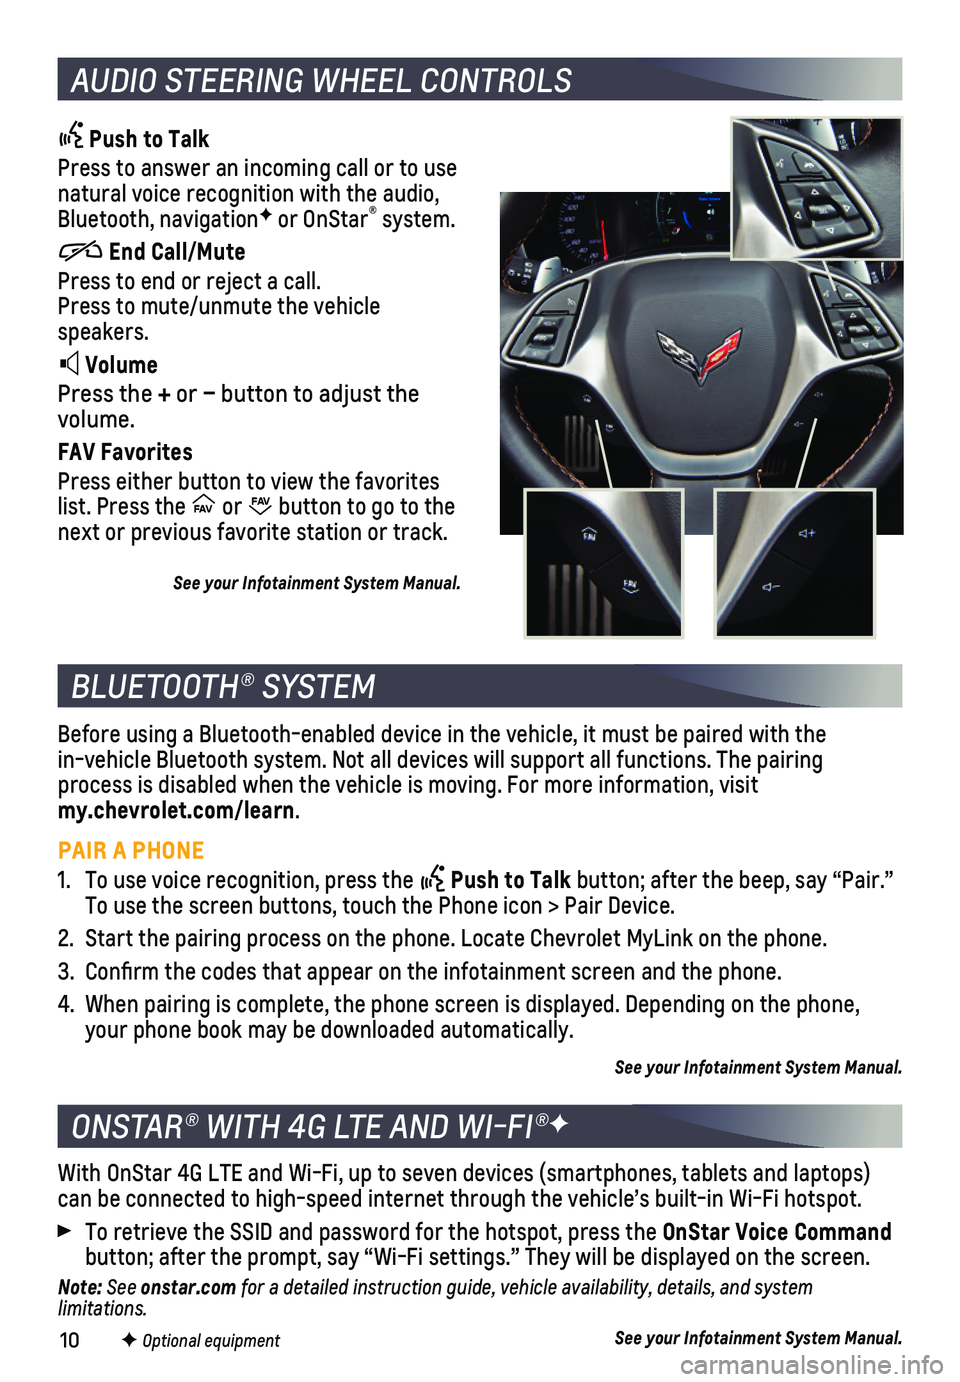 CHEVROLET CORVETTE 2018  Get To Know Guide 10
AUDIO STEERING WHEEL CONTROLS
 Push to Talk
Press to answer an incoming call or to use natural voice recognition with the audio, Bluetooth, navigationF or OnStar® system.
          End Call/Mute
P